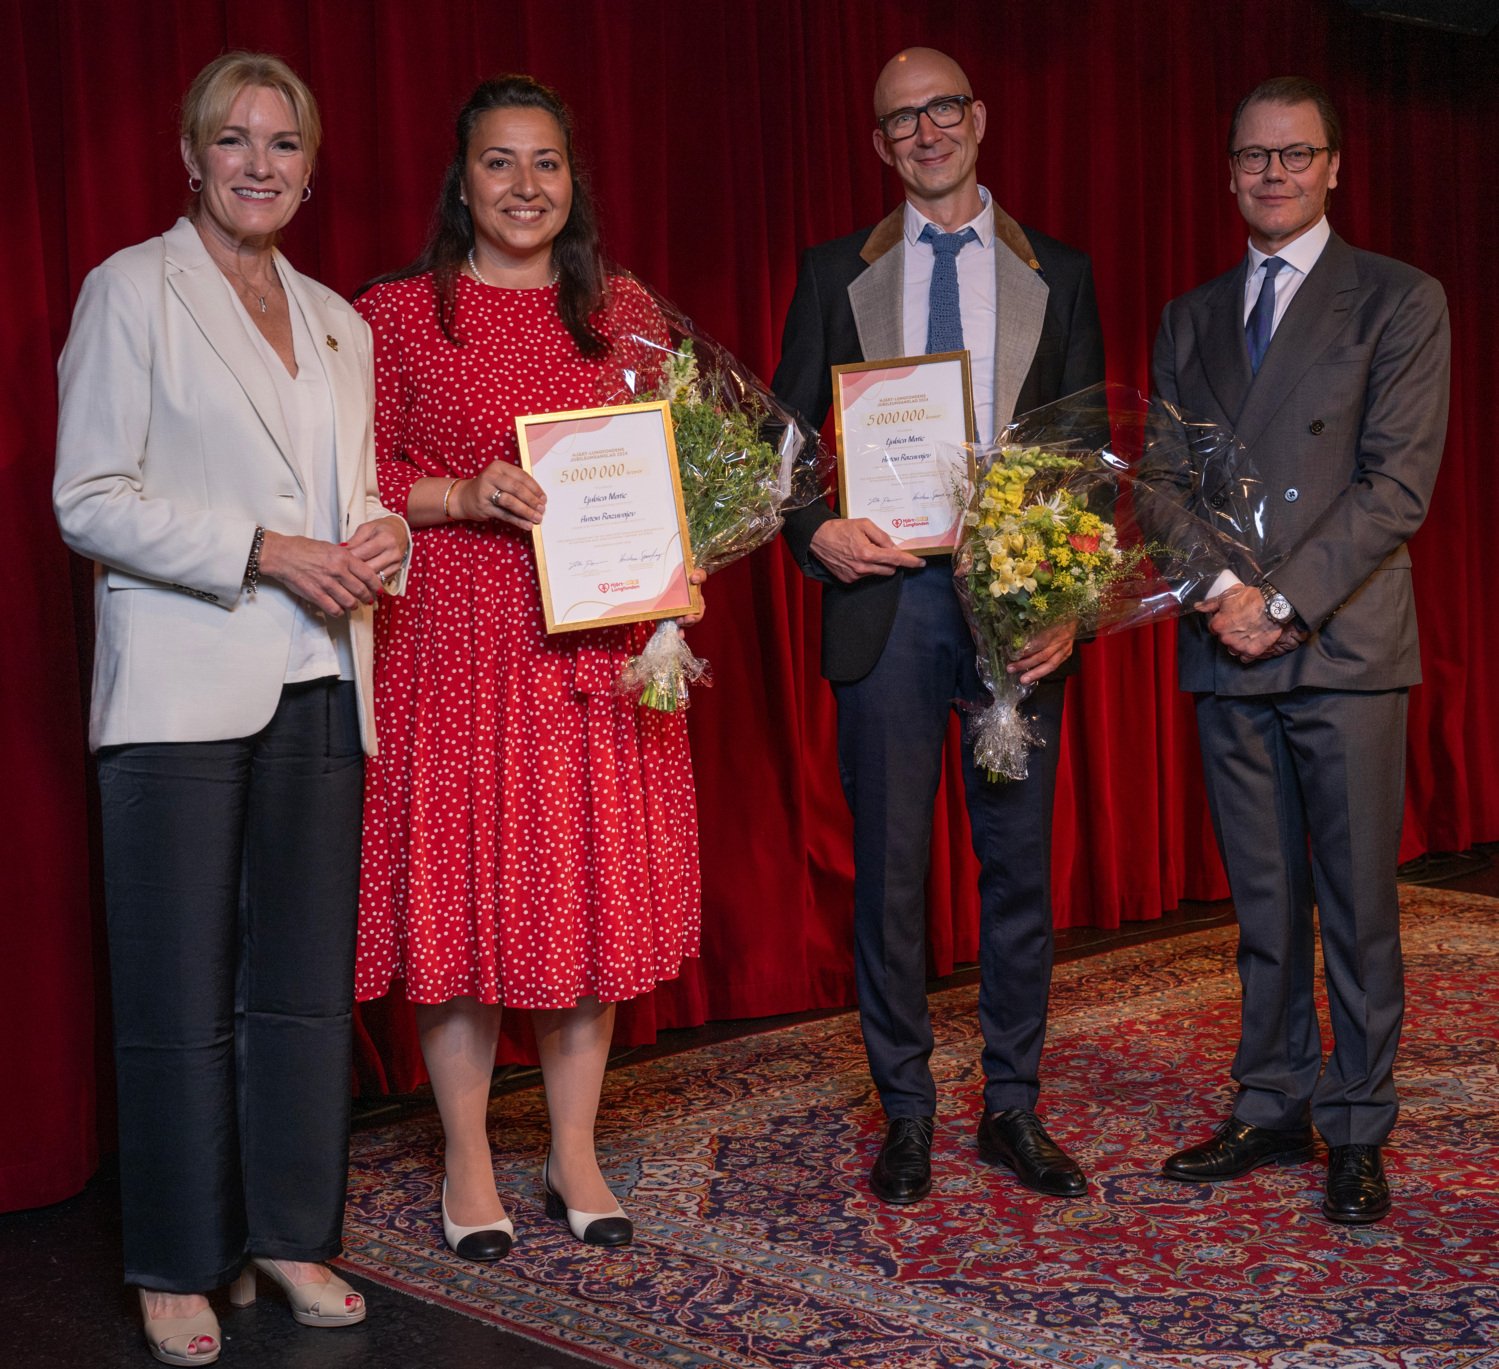 (From left) Kristina Sparreljung, Secretary General of the Swedish Heart-Lung Foundation, with Ljubica Perisic Matic and Anton Razuvajev, both researchers at KI, and Prince Daniel at the presentation of the Jubilee Grant.